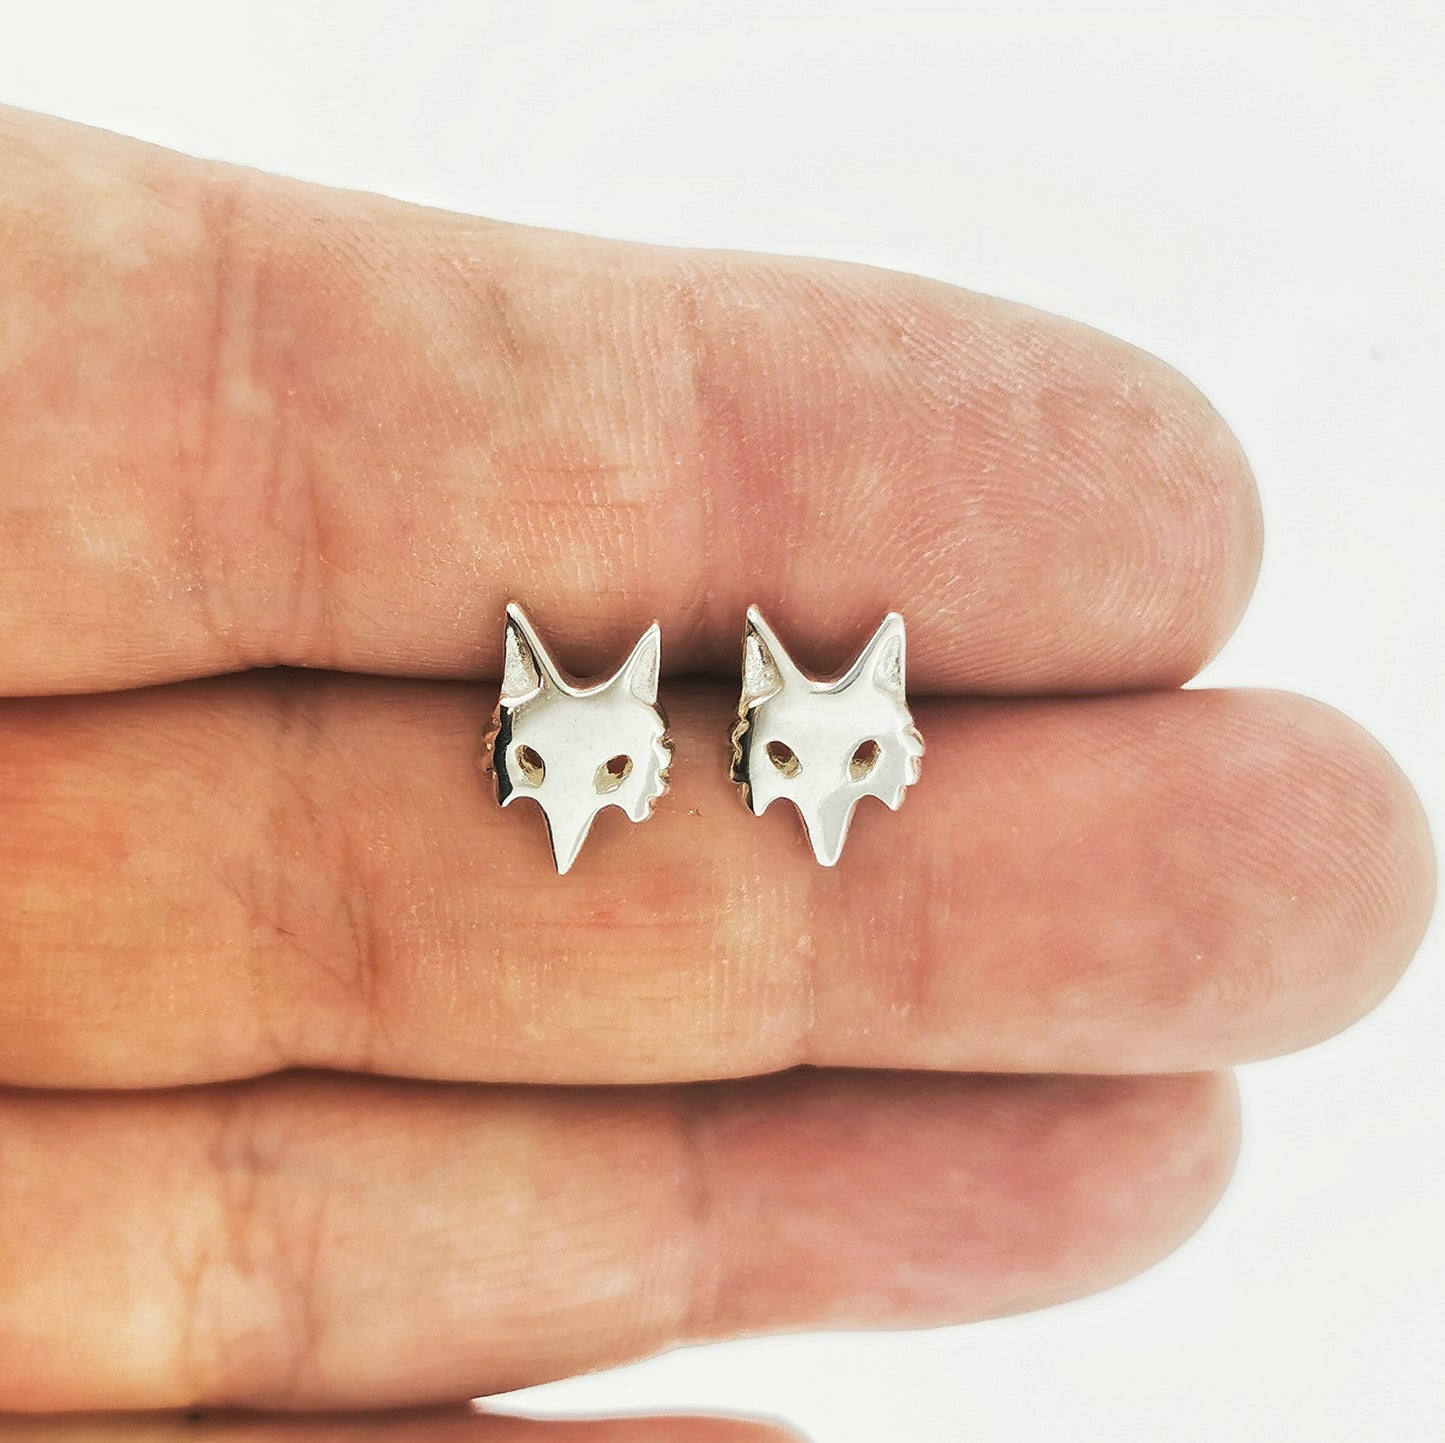 Gold Fox Stud Earrings Made to Order, Gold Fox Stud Earrings, Gold Fox Earrings, Gold Kitsune Earrings, Gold Kitsune Fox earrings, Gold Kitsune Studs, Gold Kitsune Stud Earrings, Gold Kitsune Fox Studs, Gold Kitsune Fox Stud Earrings, Gold Animal Stud Earrings, Gold Animal Studs, Fox Stud Earrings, Gold Animal Earrings